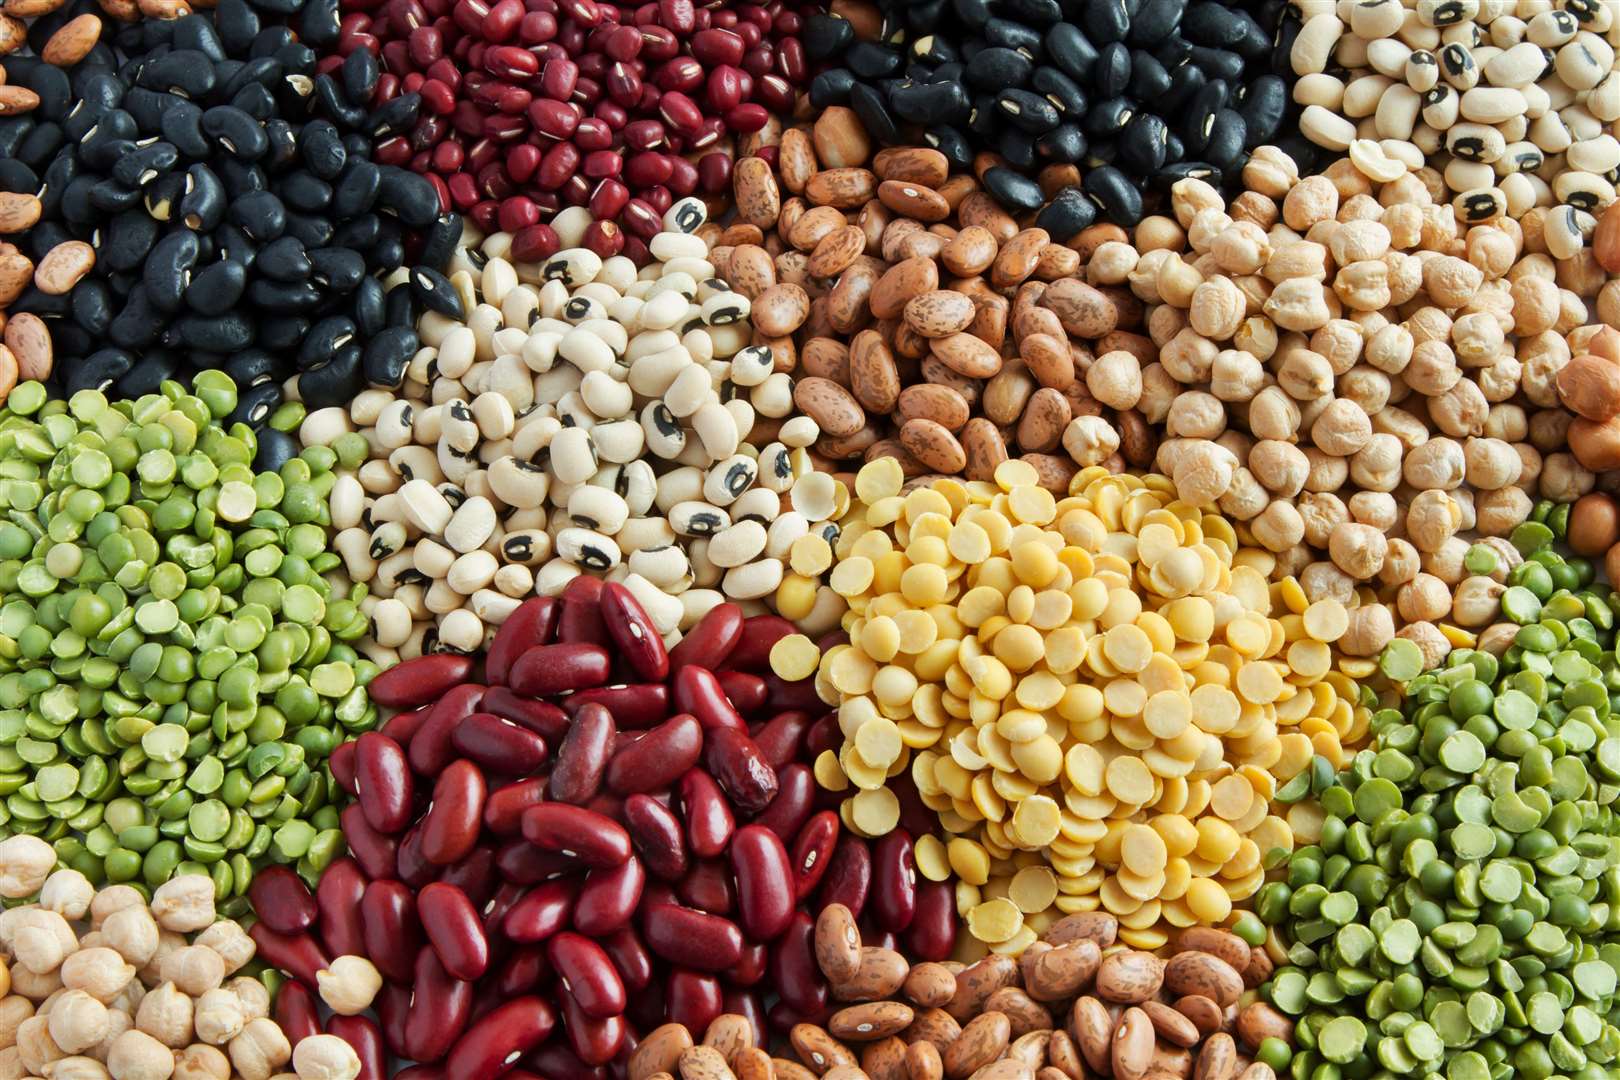 Legumes form part of a healthy plant-based diet (Thinkstock/PA)